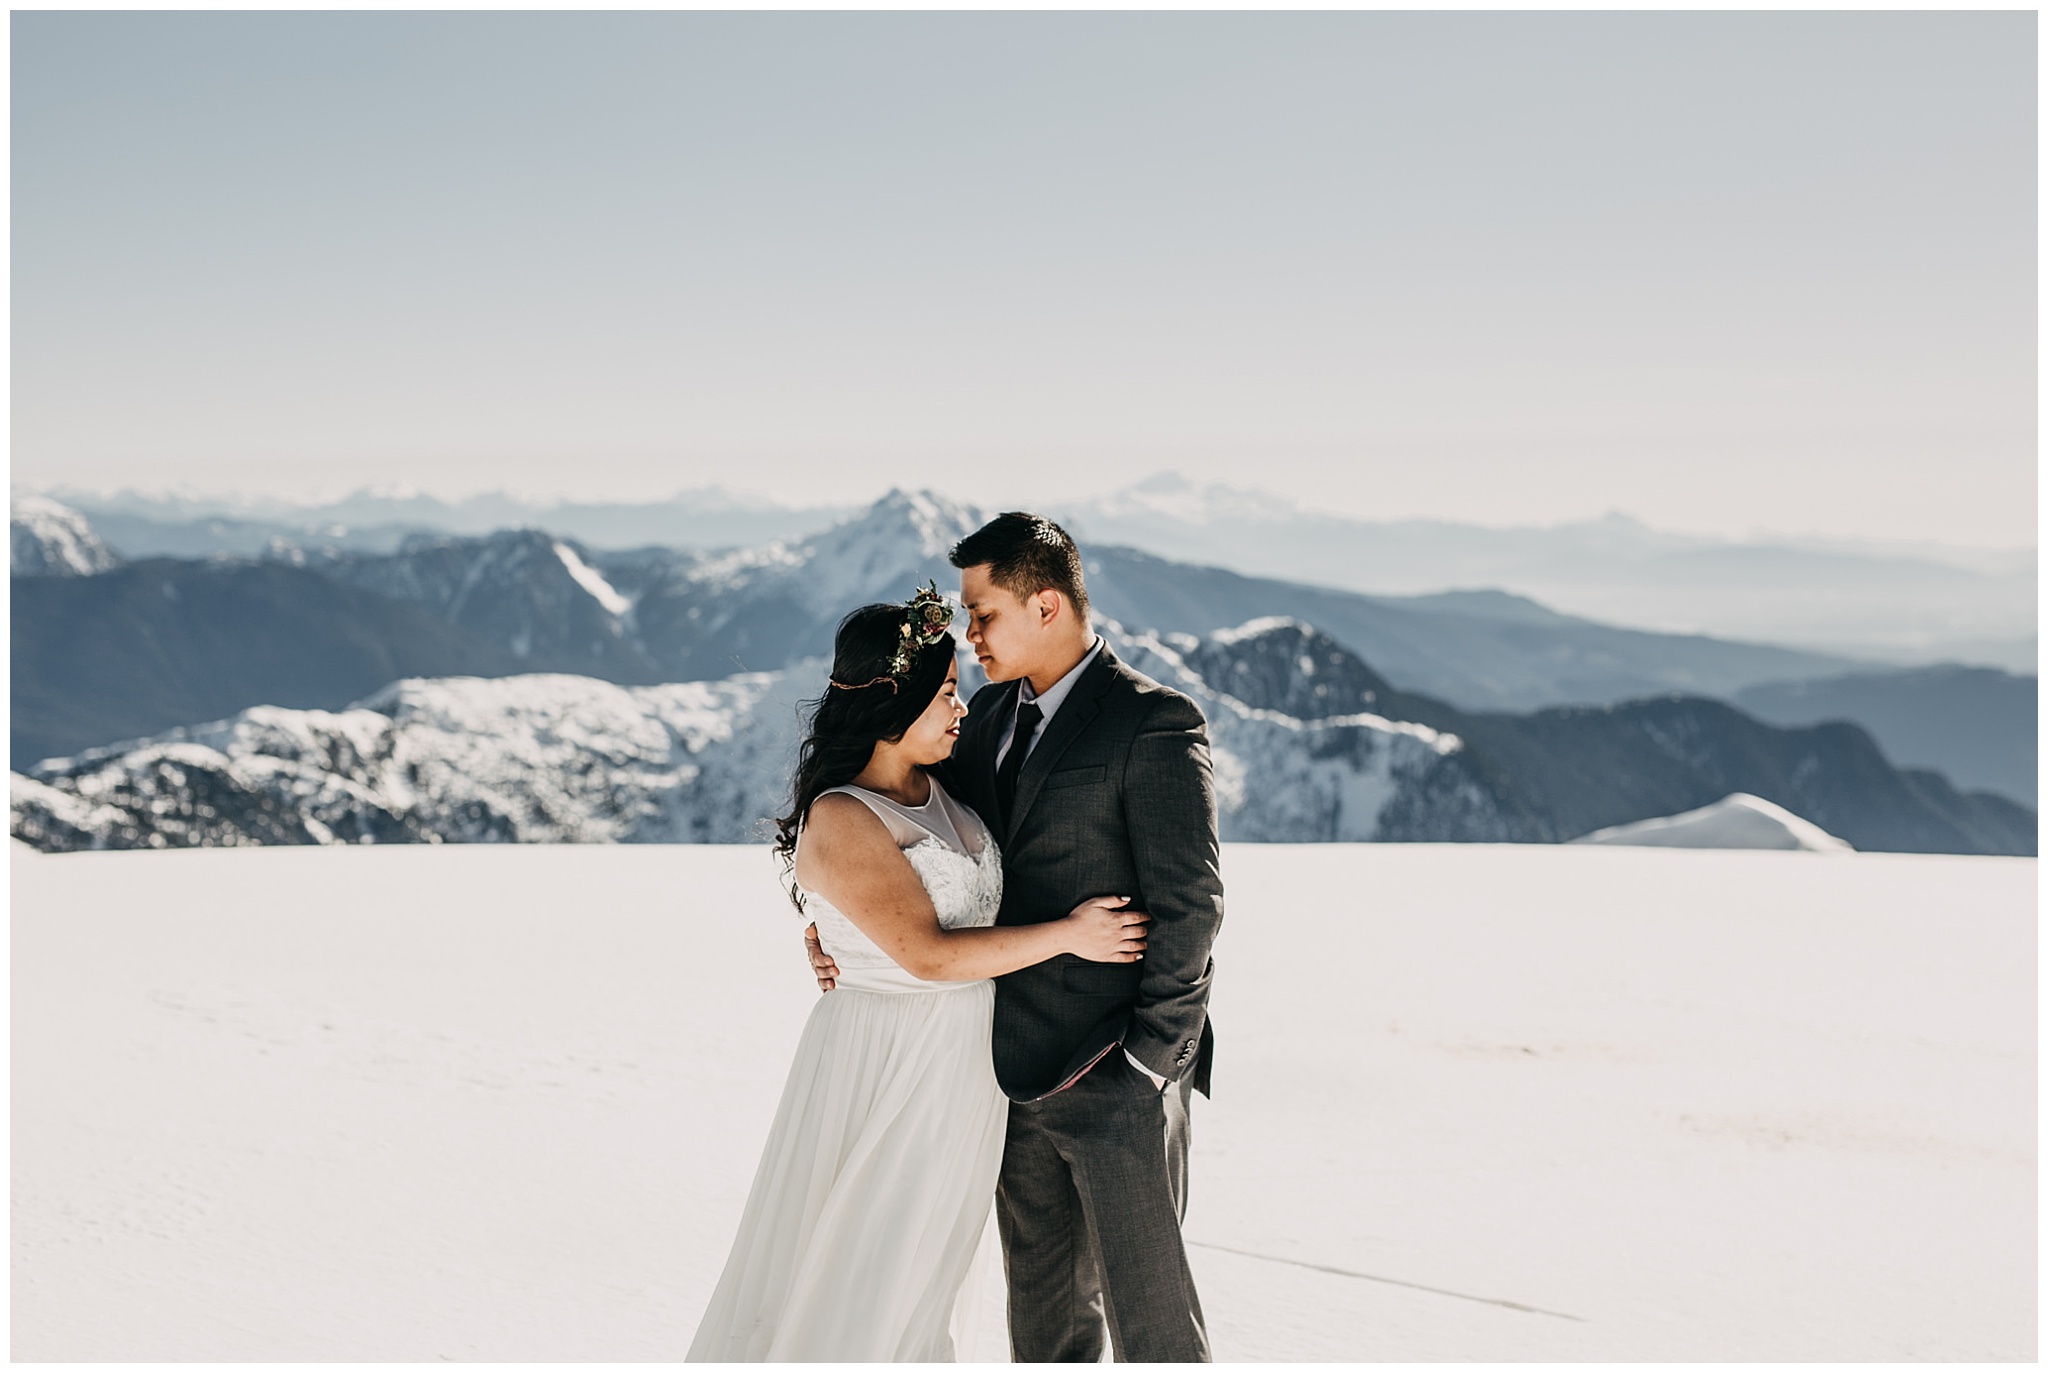 bride groom portrait on snowy mountaintop wedding day sky helicopters